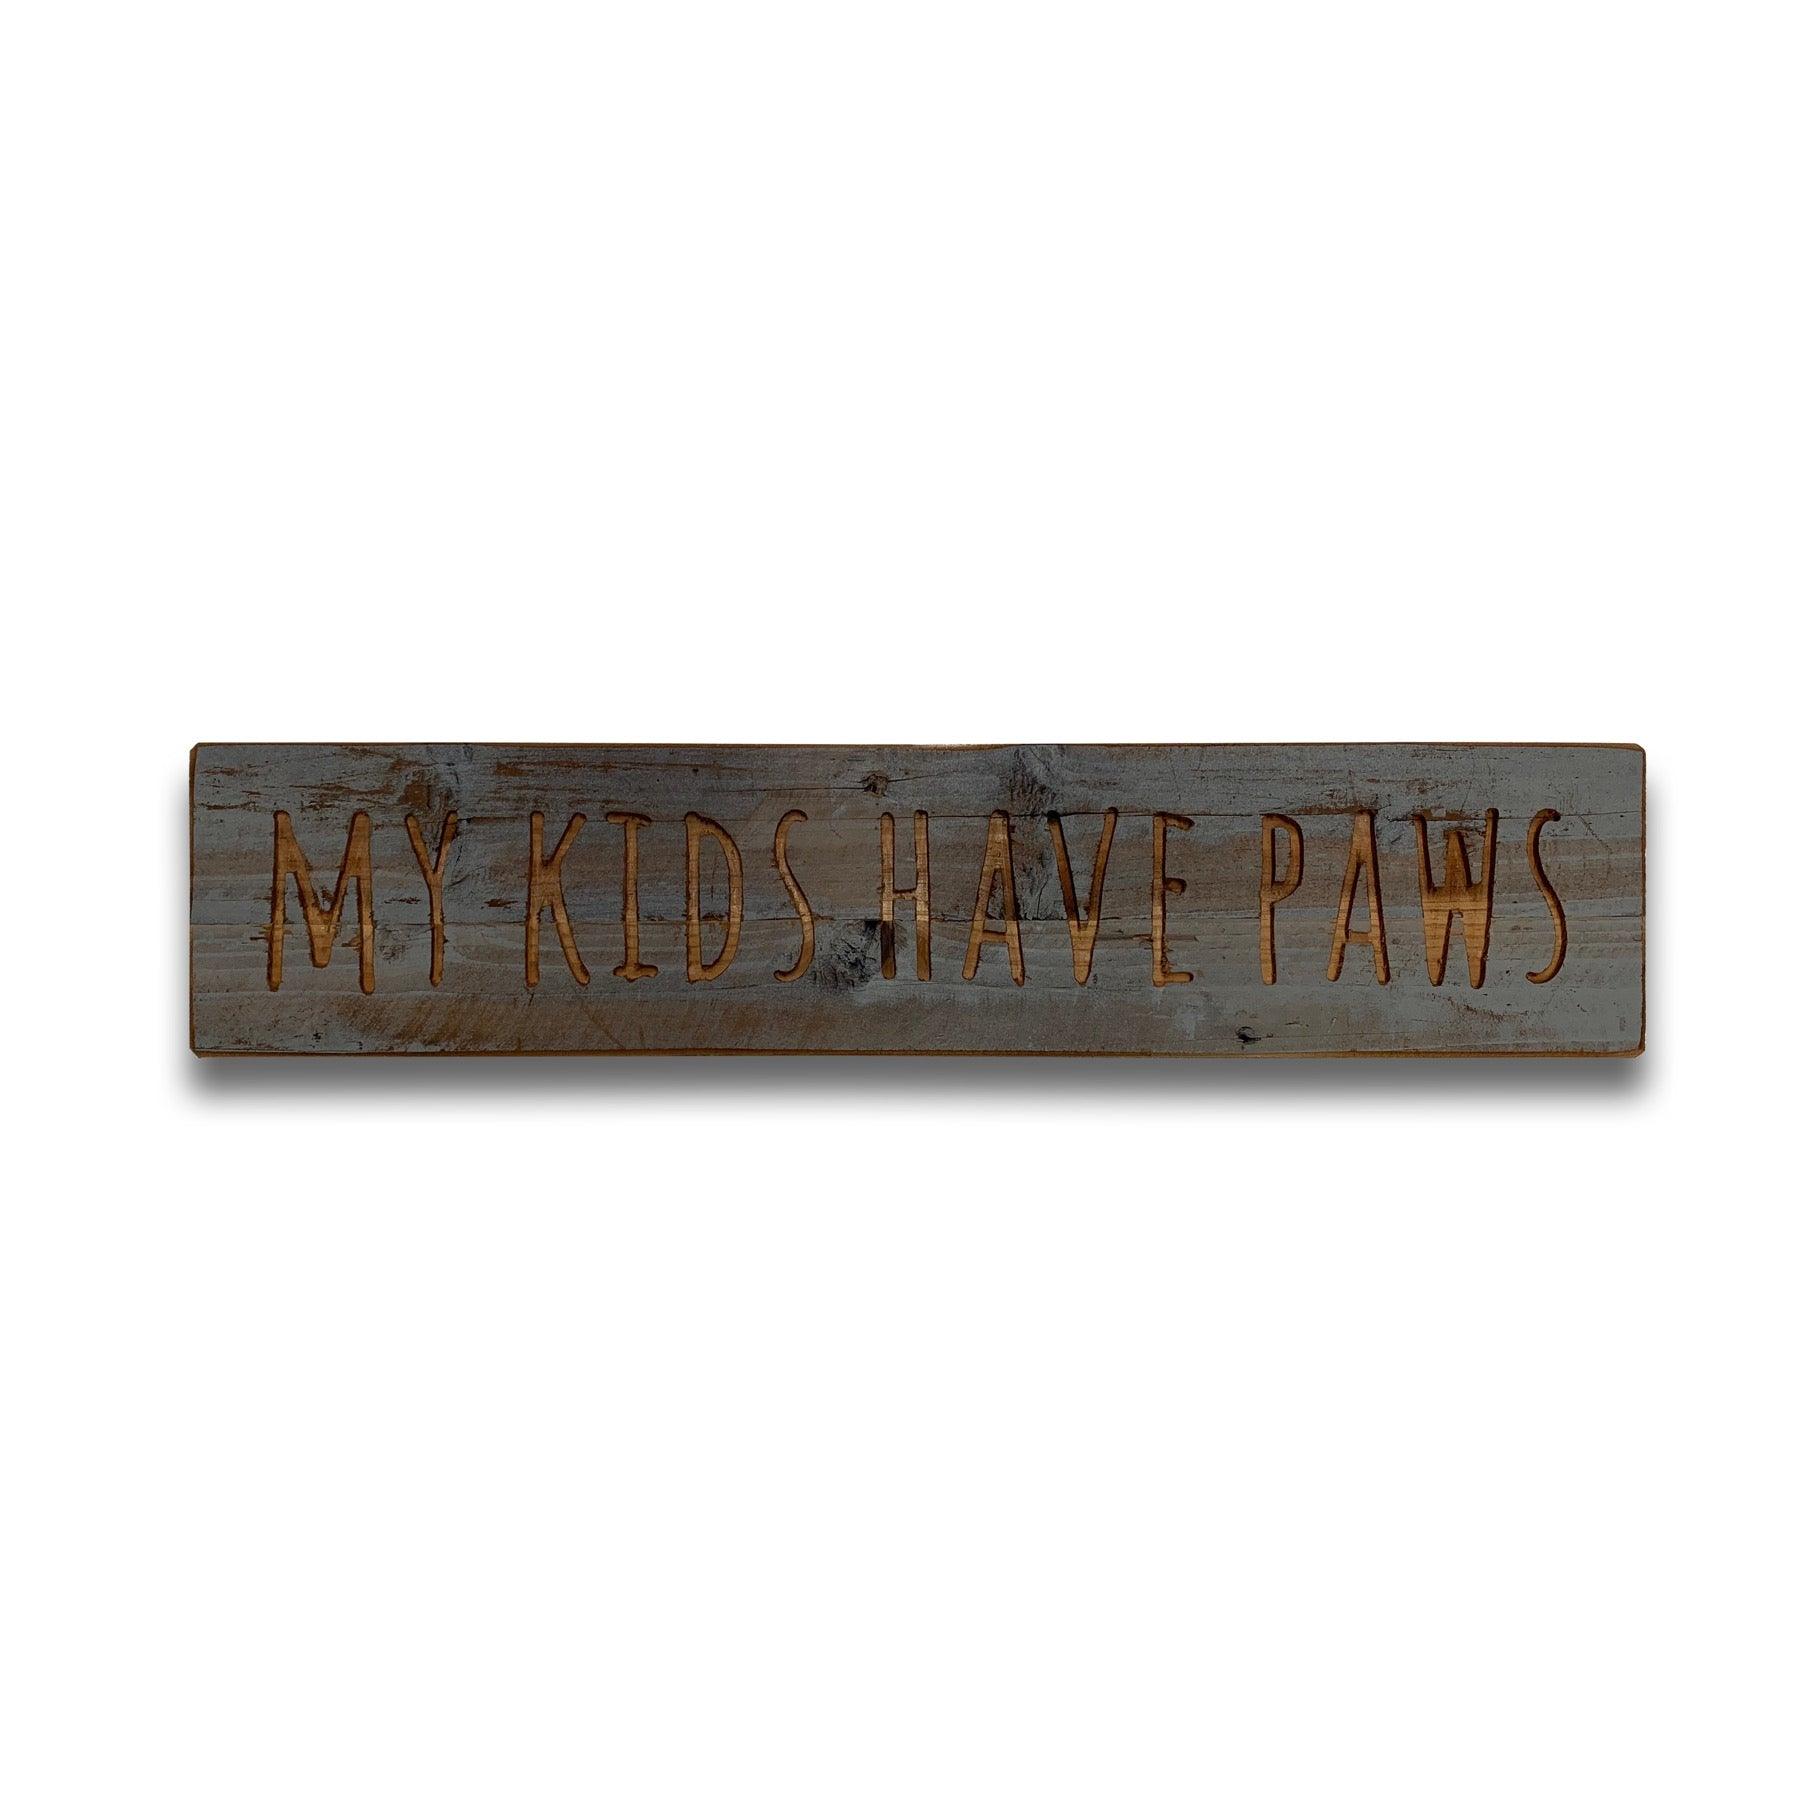 View Kids Have Paws Grey Wash Wooden Message Plaque information